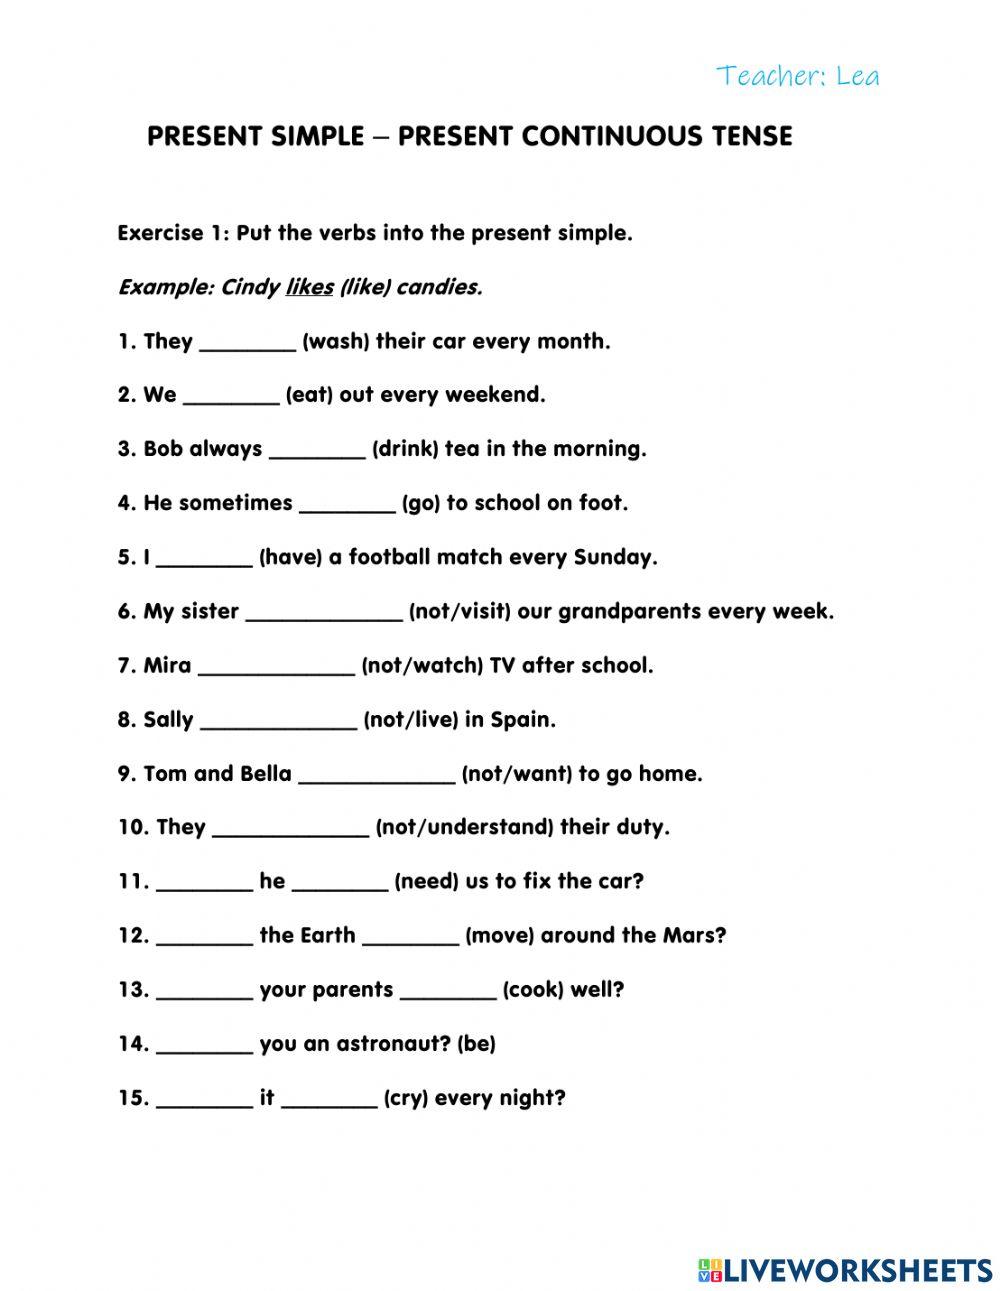 Pdf online exercise: Present simple - present continuous | Live Worksheets